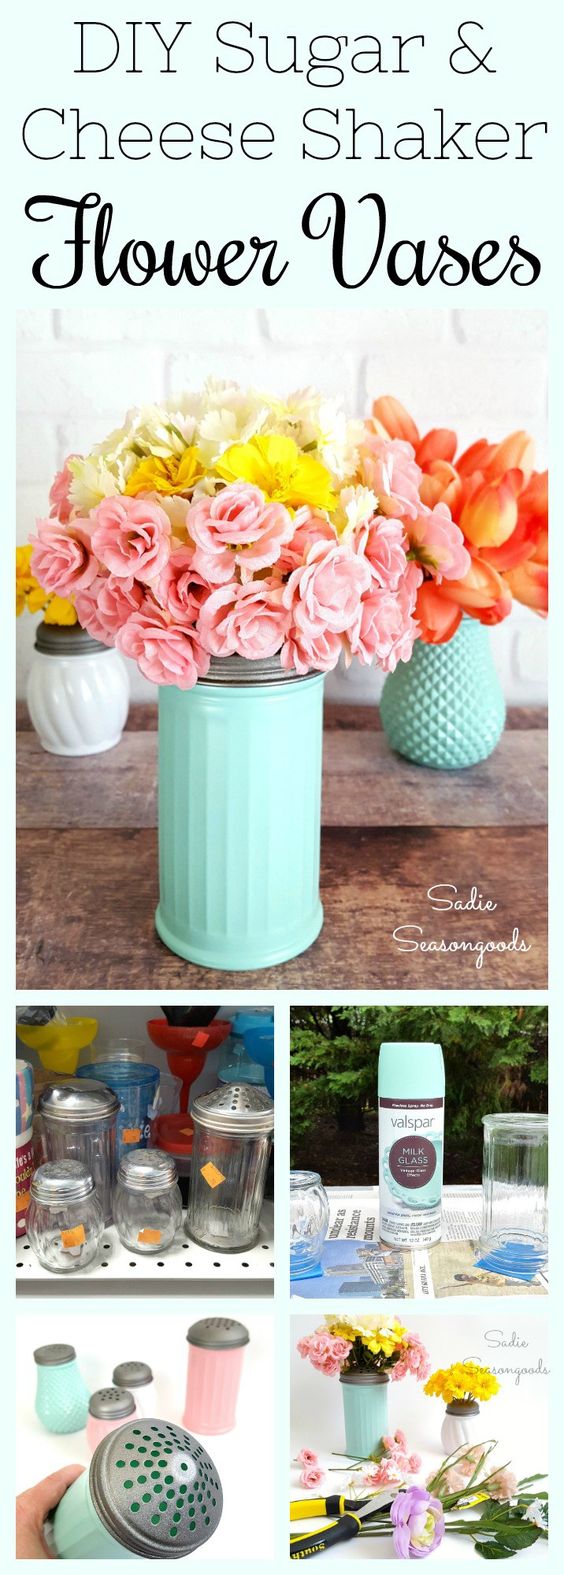 DIY Vases From Dollar Store Cheese & Sugar Shakers. 